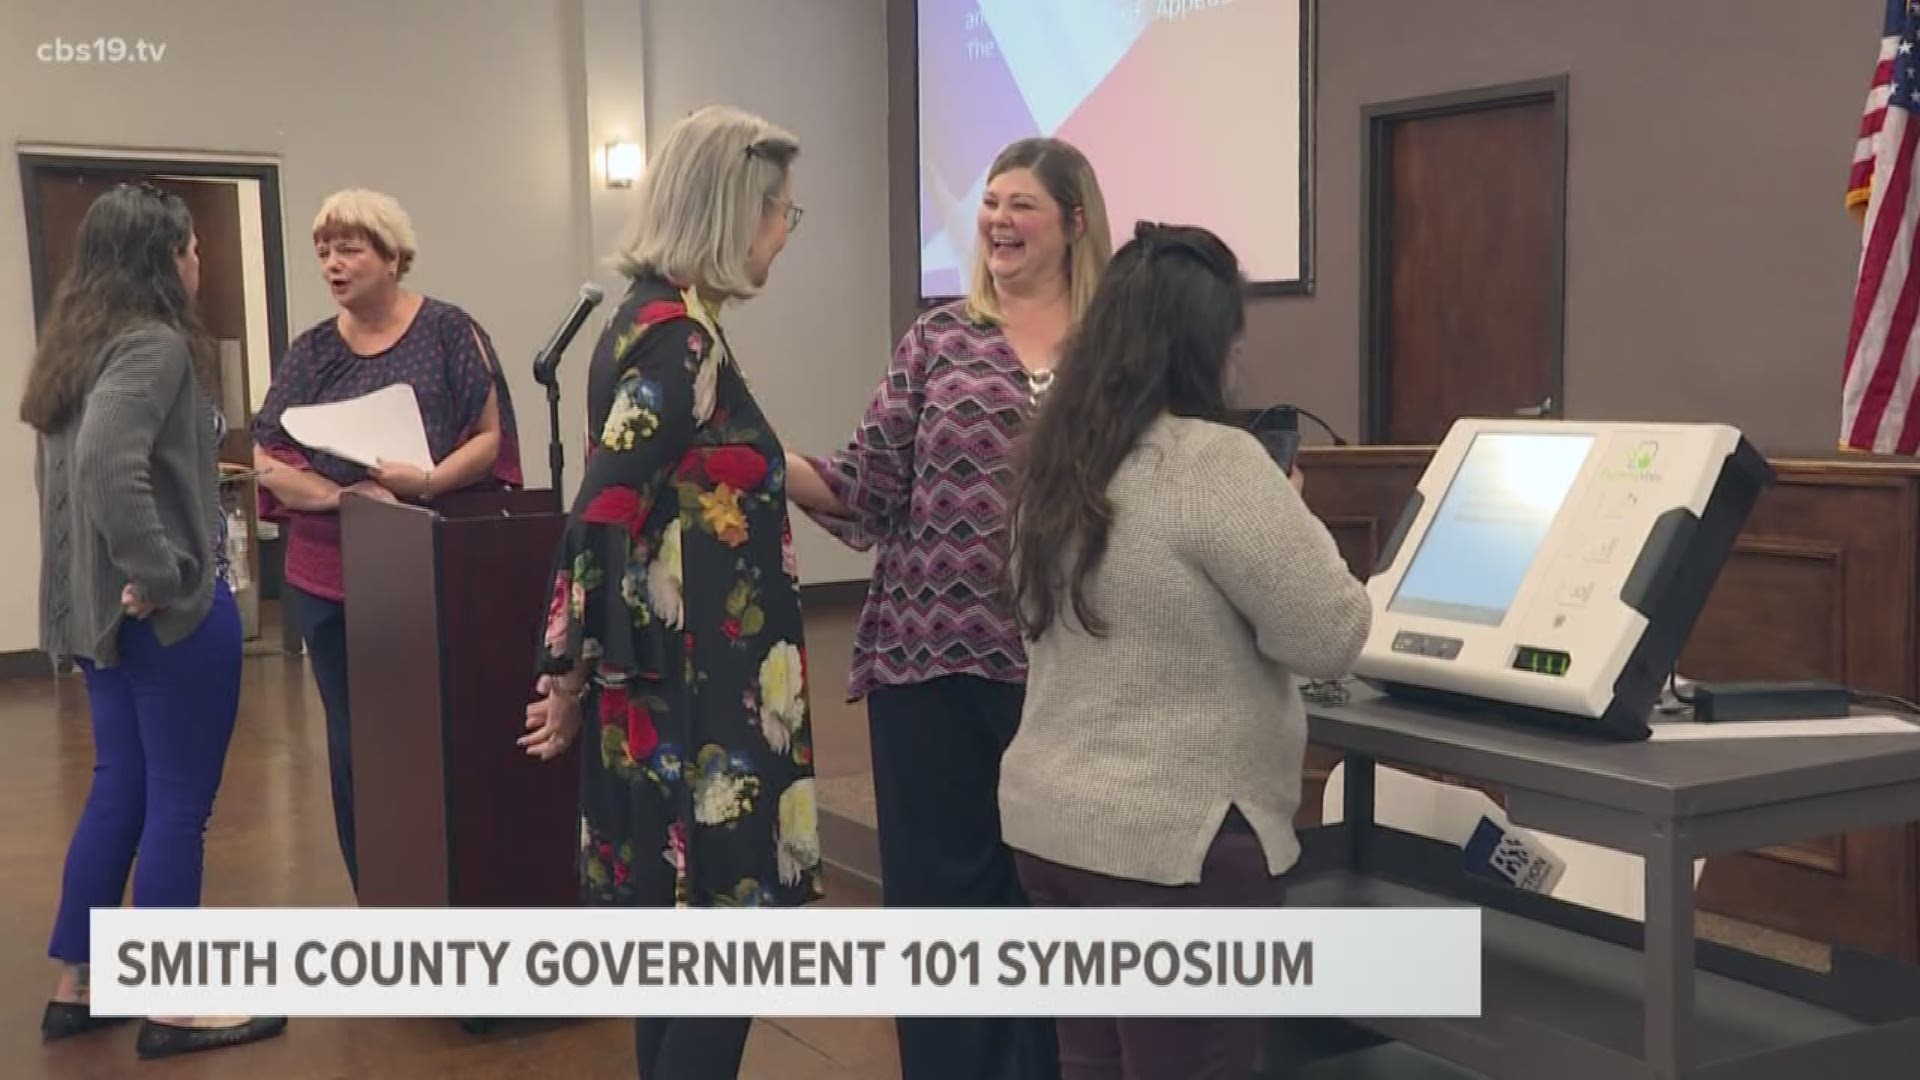 It's National County Government Month and to kick it off, Smith County hosted a Government 101 Symposium.